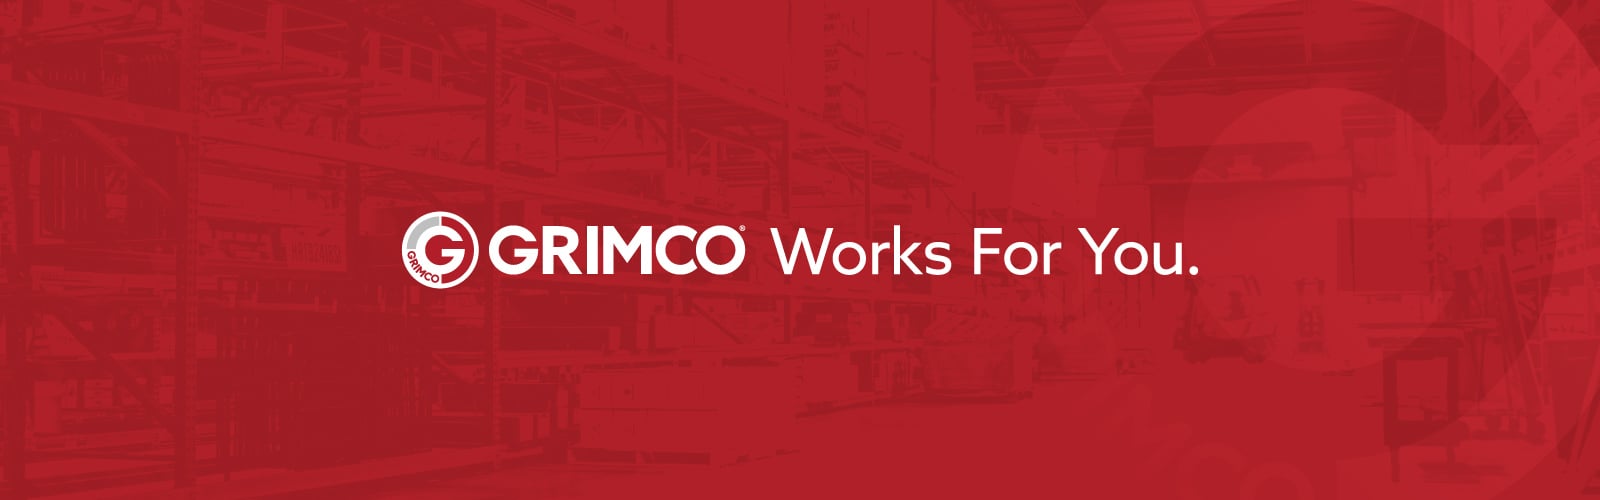 Grimco Works For You.